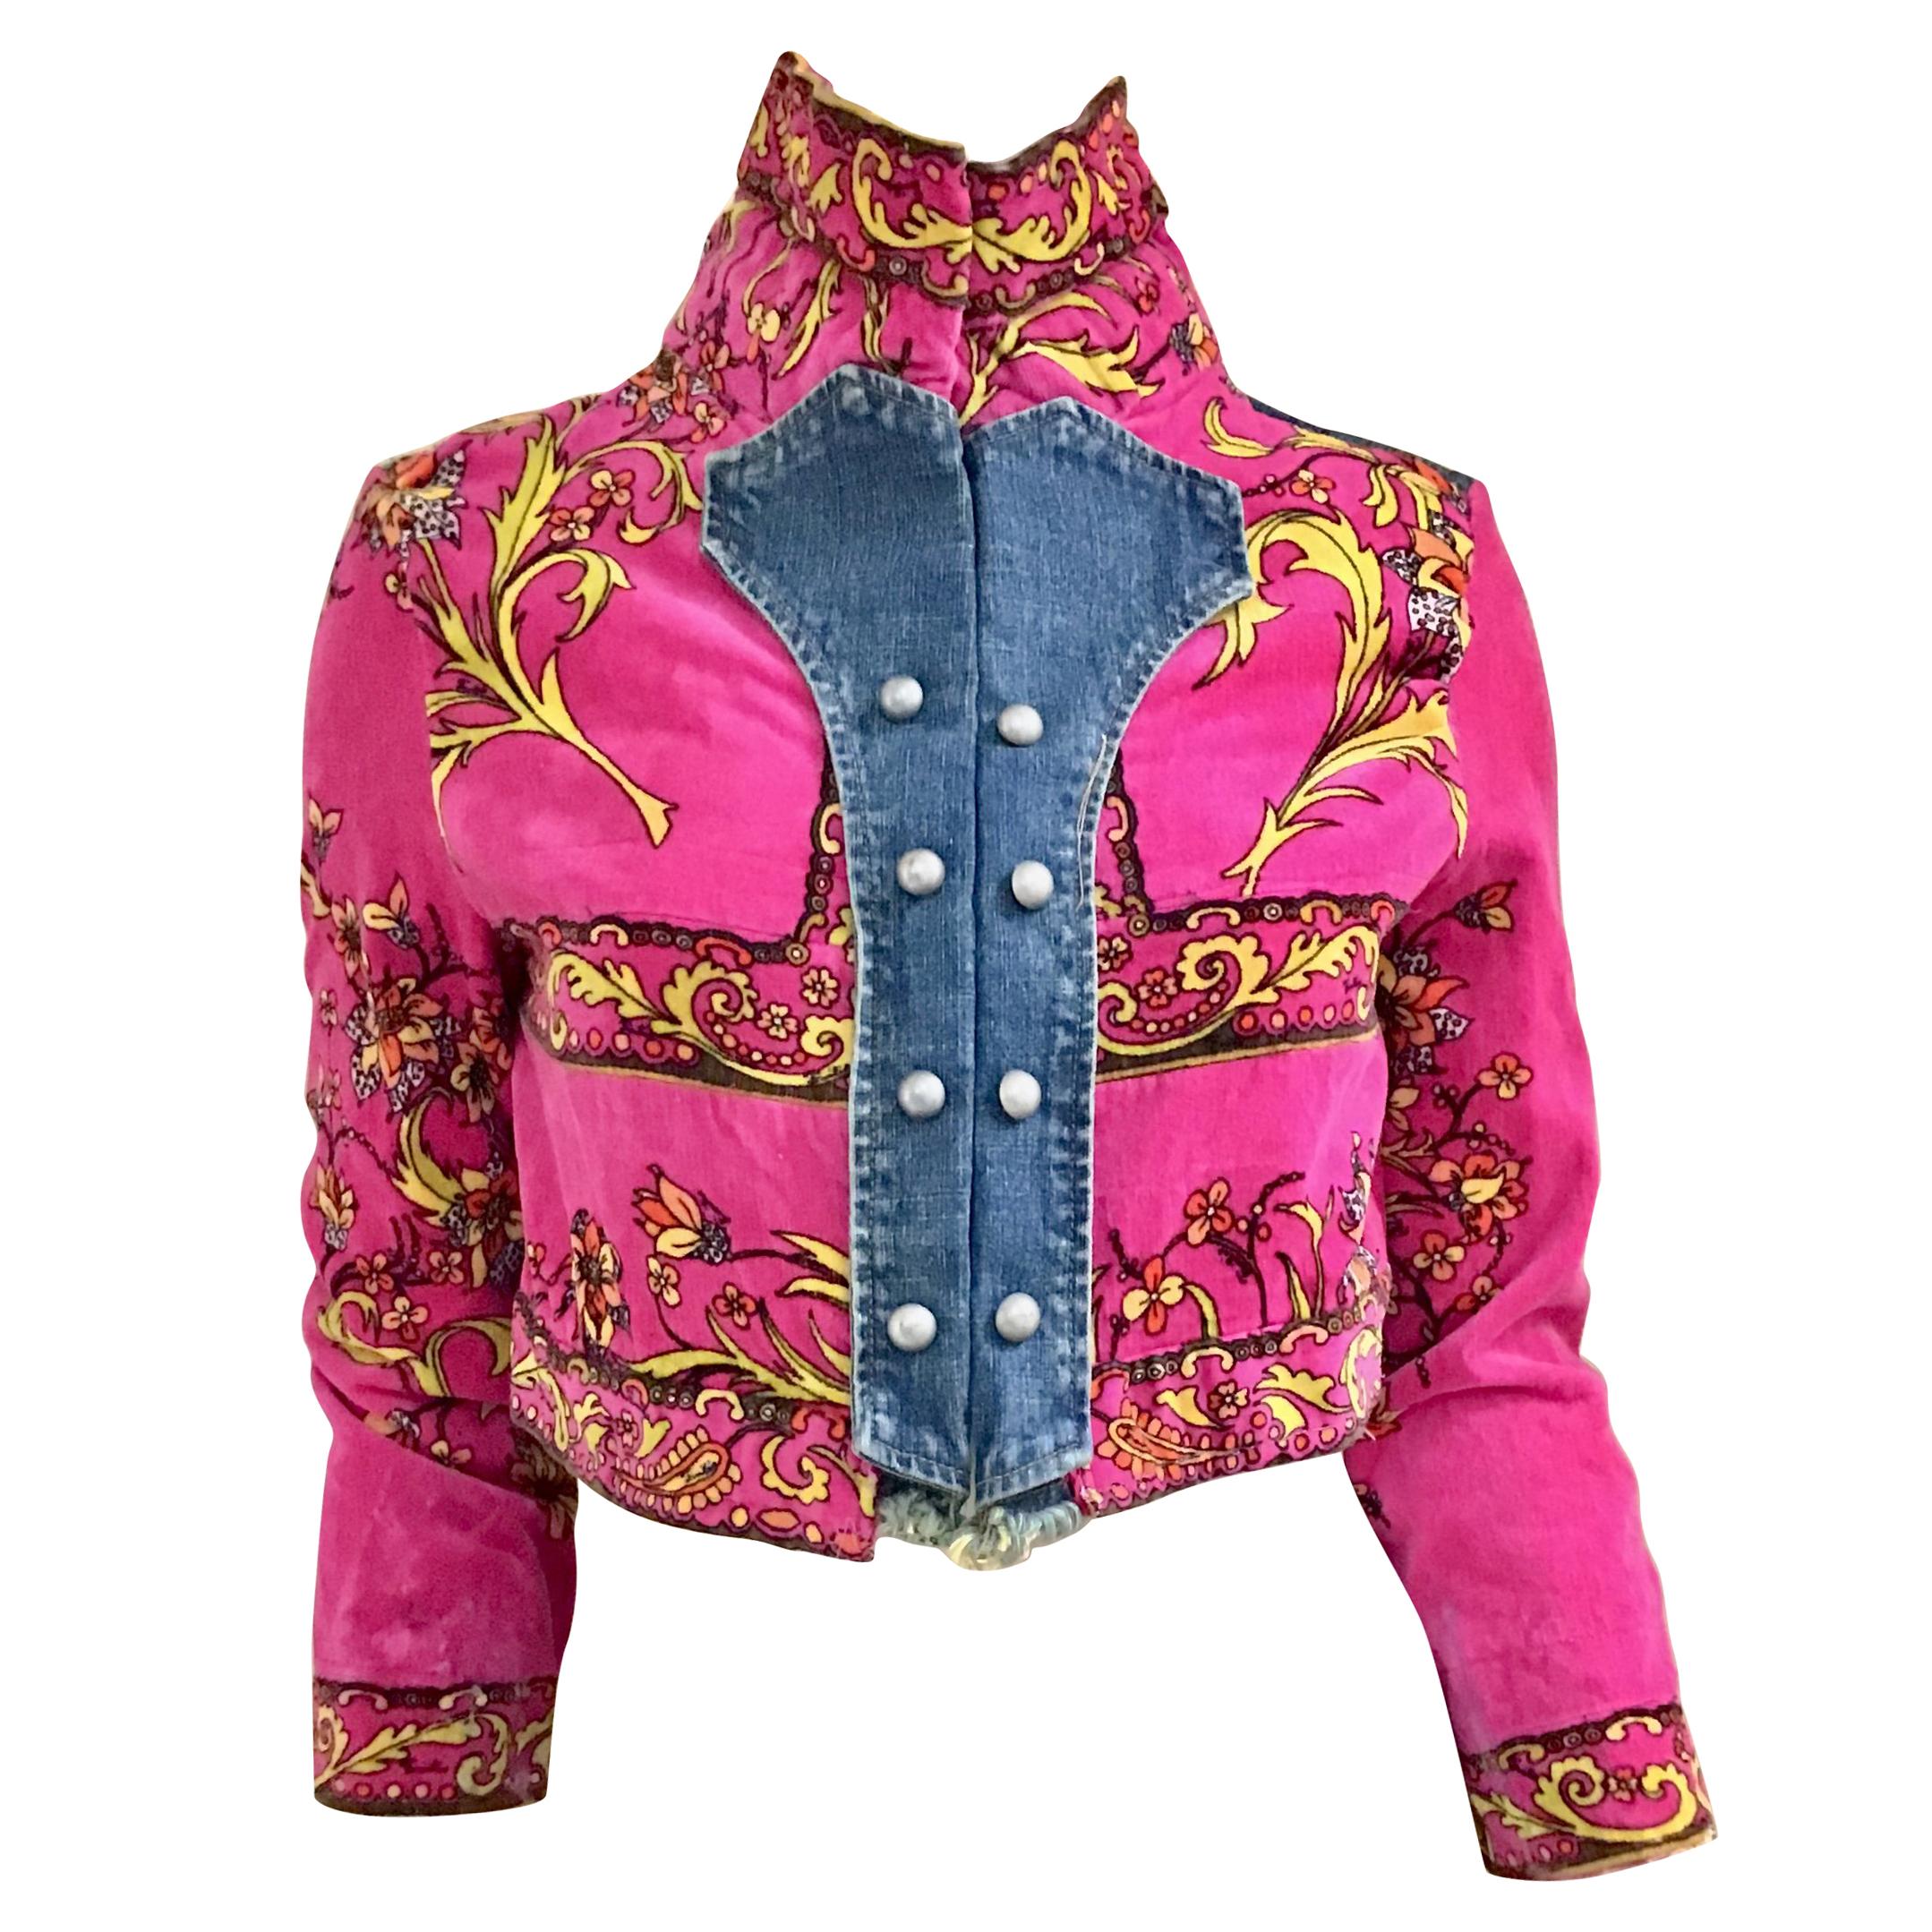 Upcycled 1970s Pucci Jacket